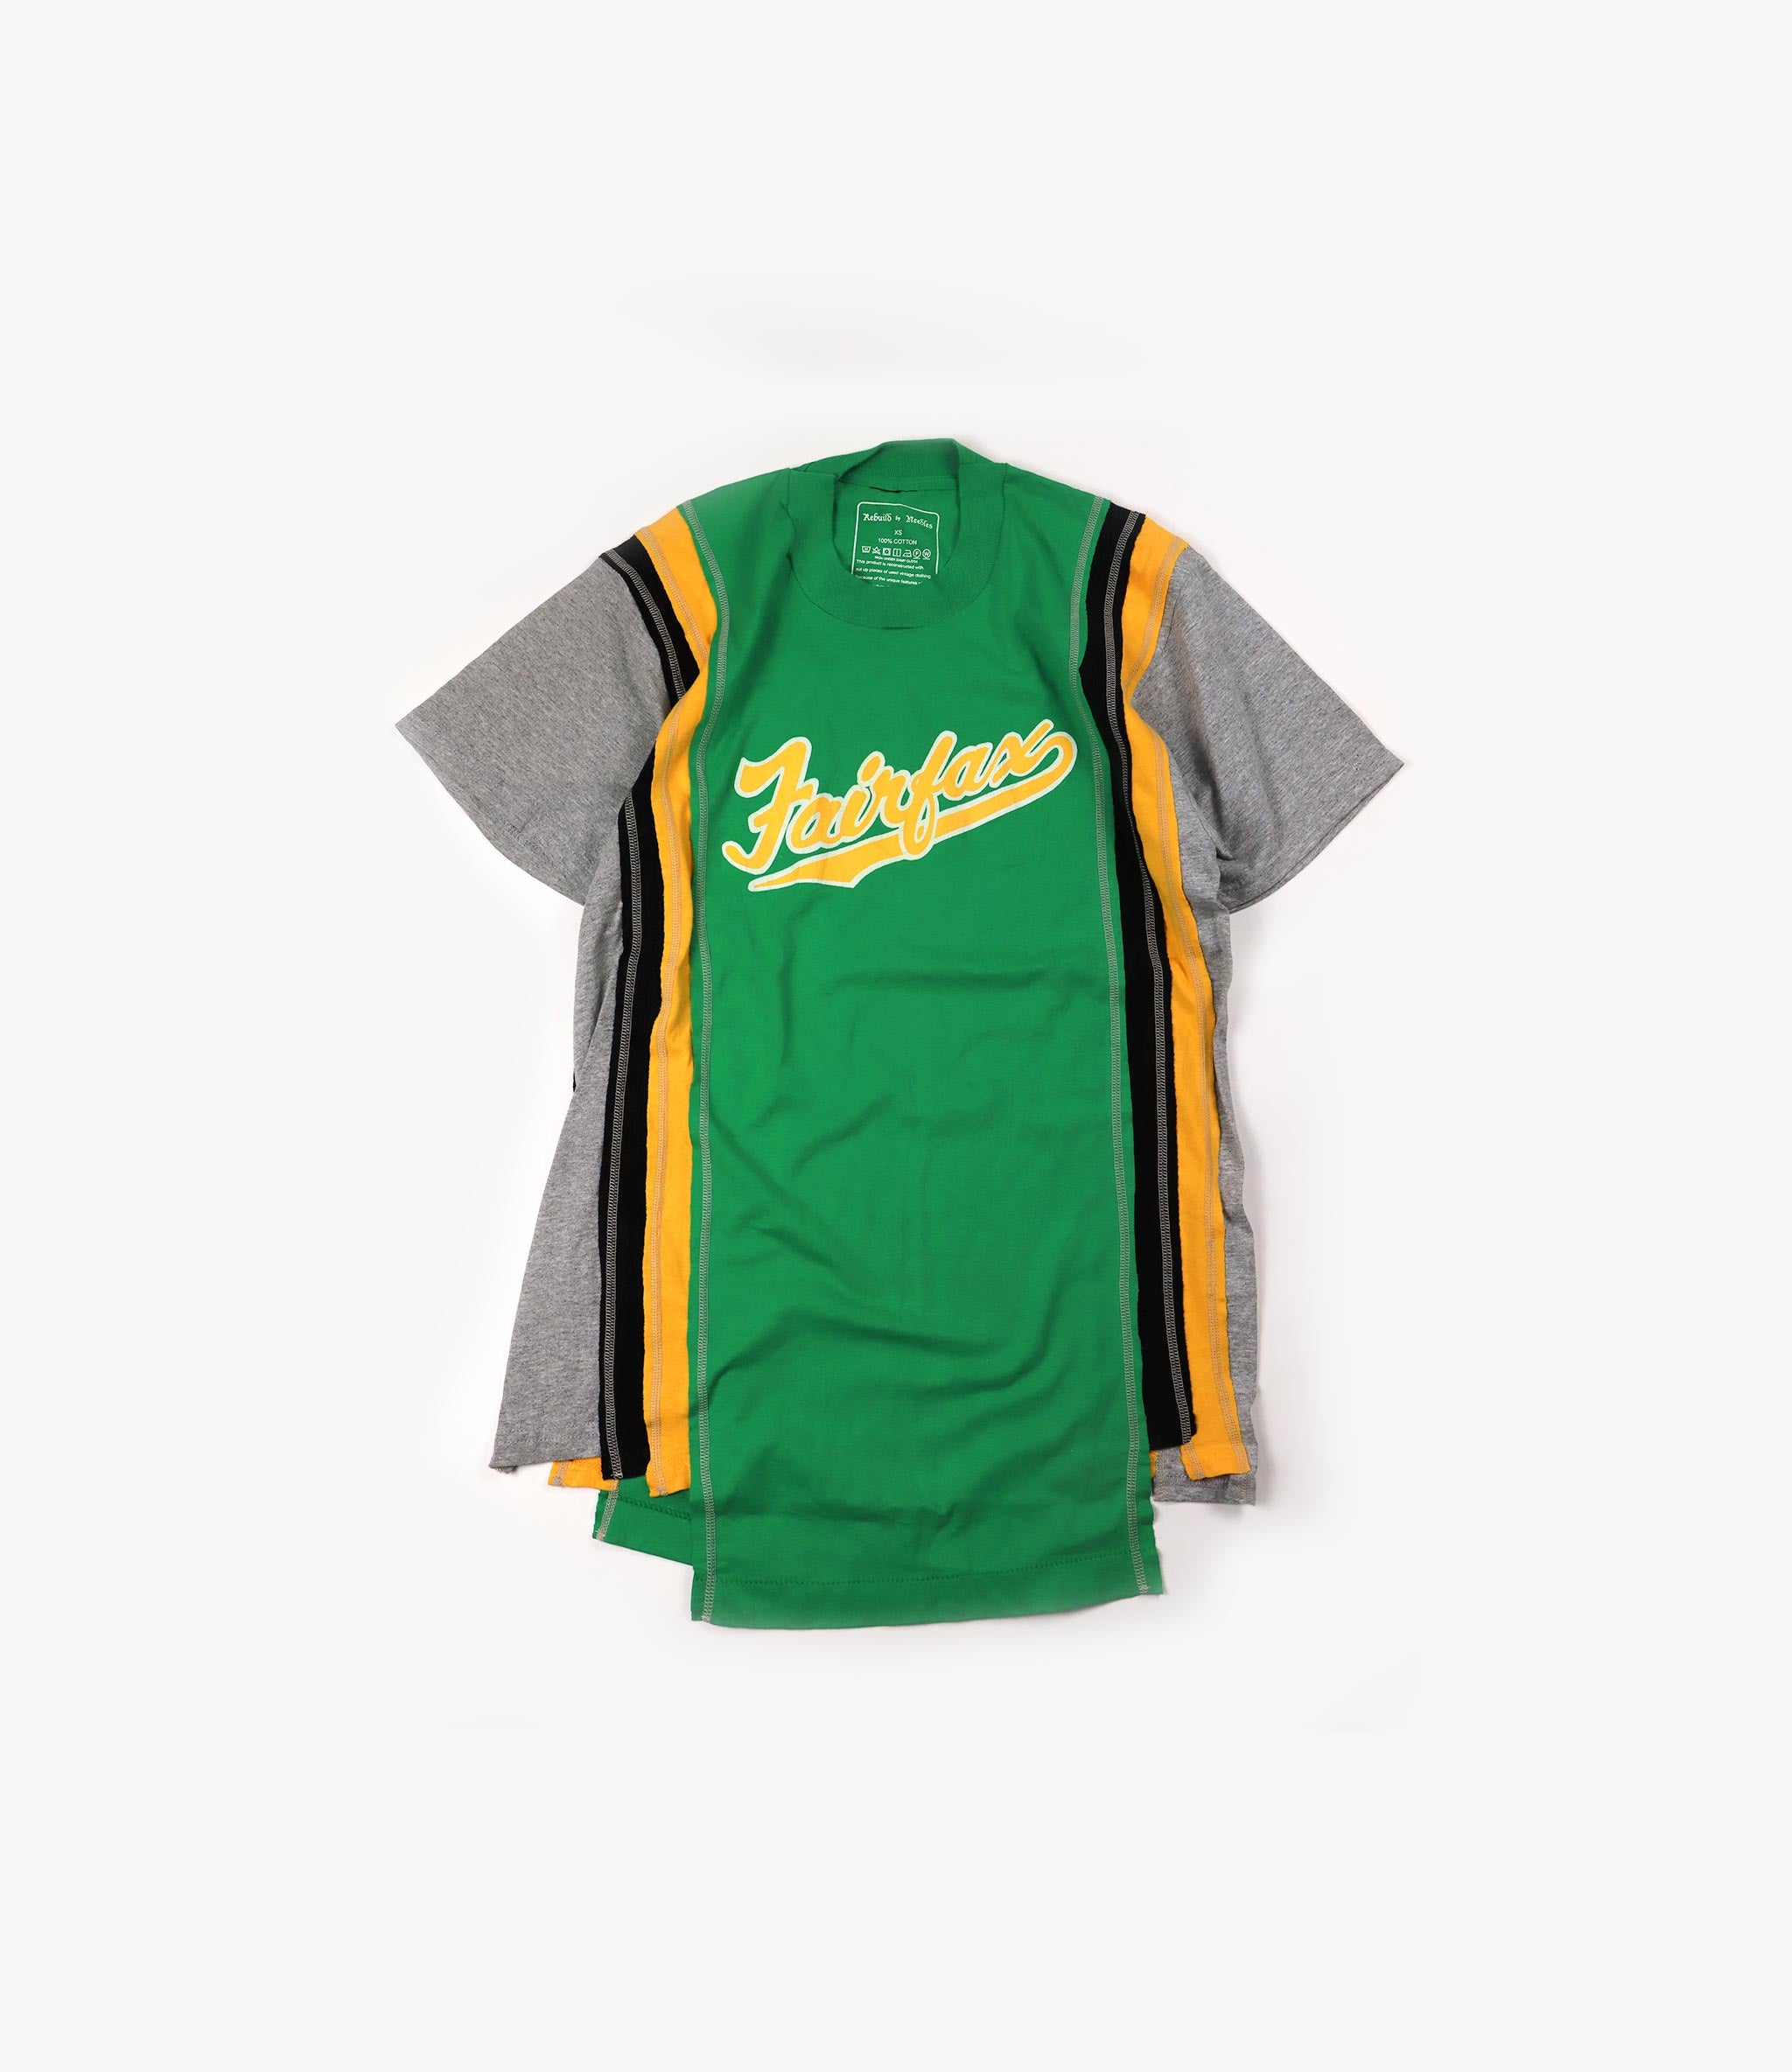 Rebuild by Needles 7 Cuts Short Sleeve College Tee - XS